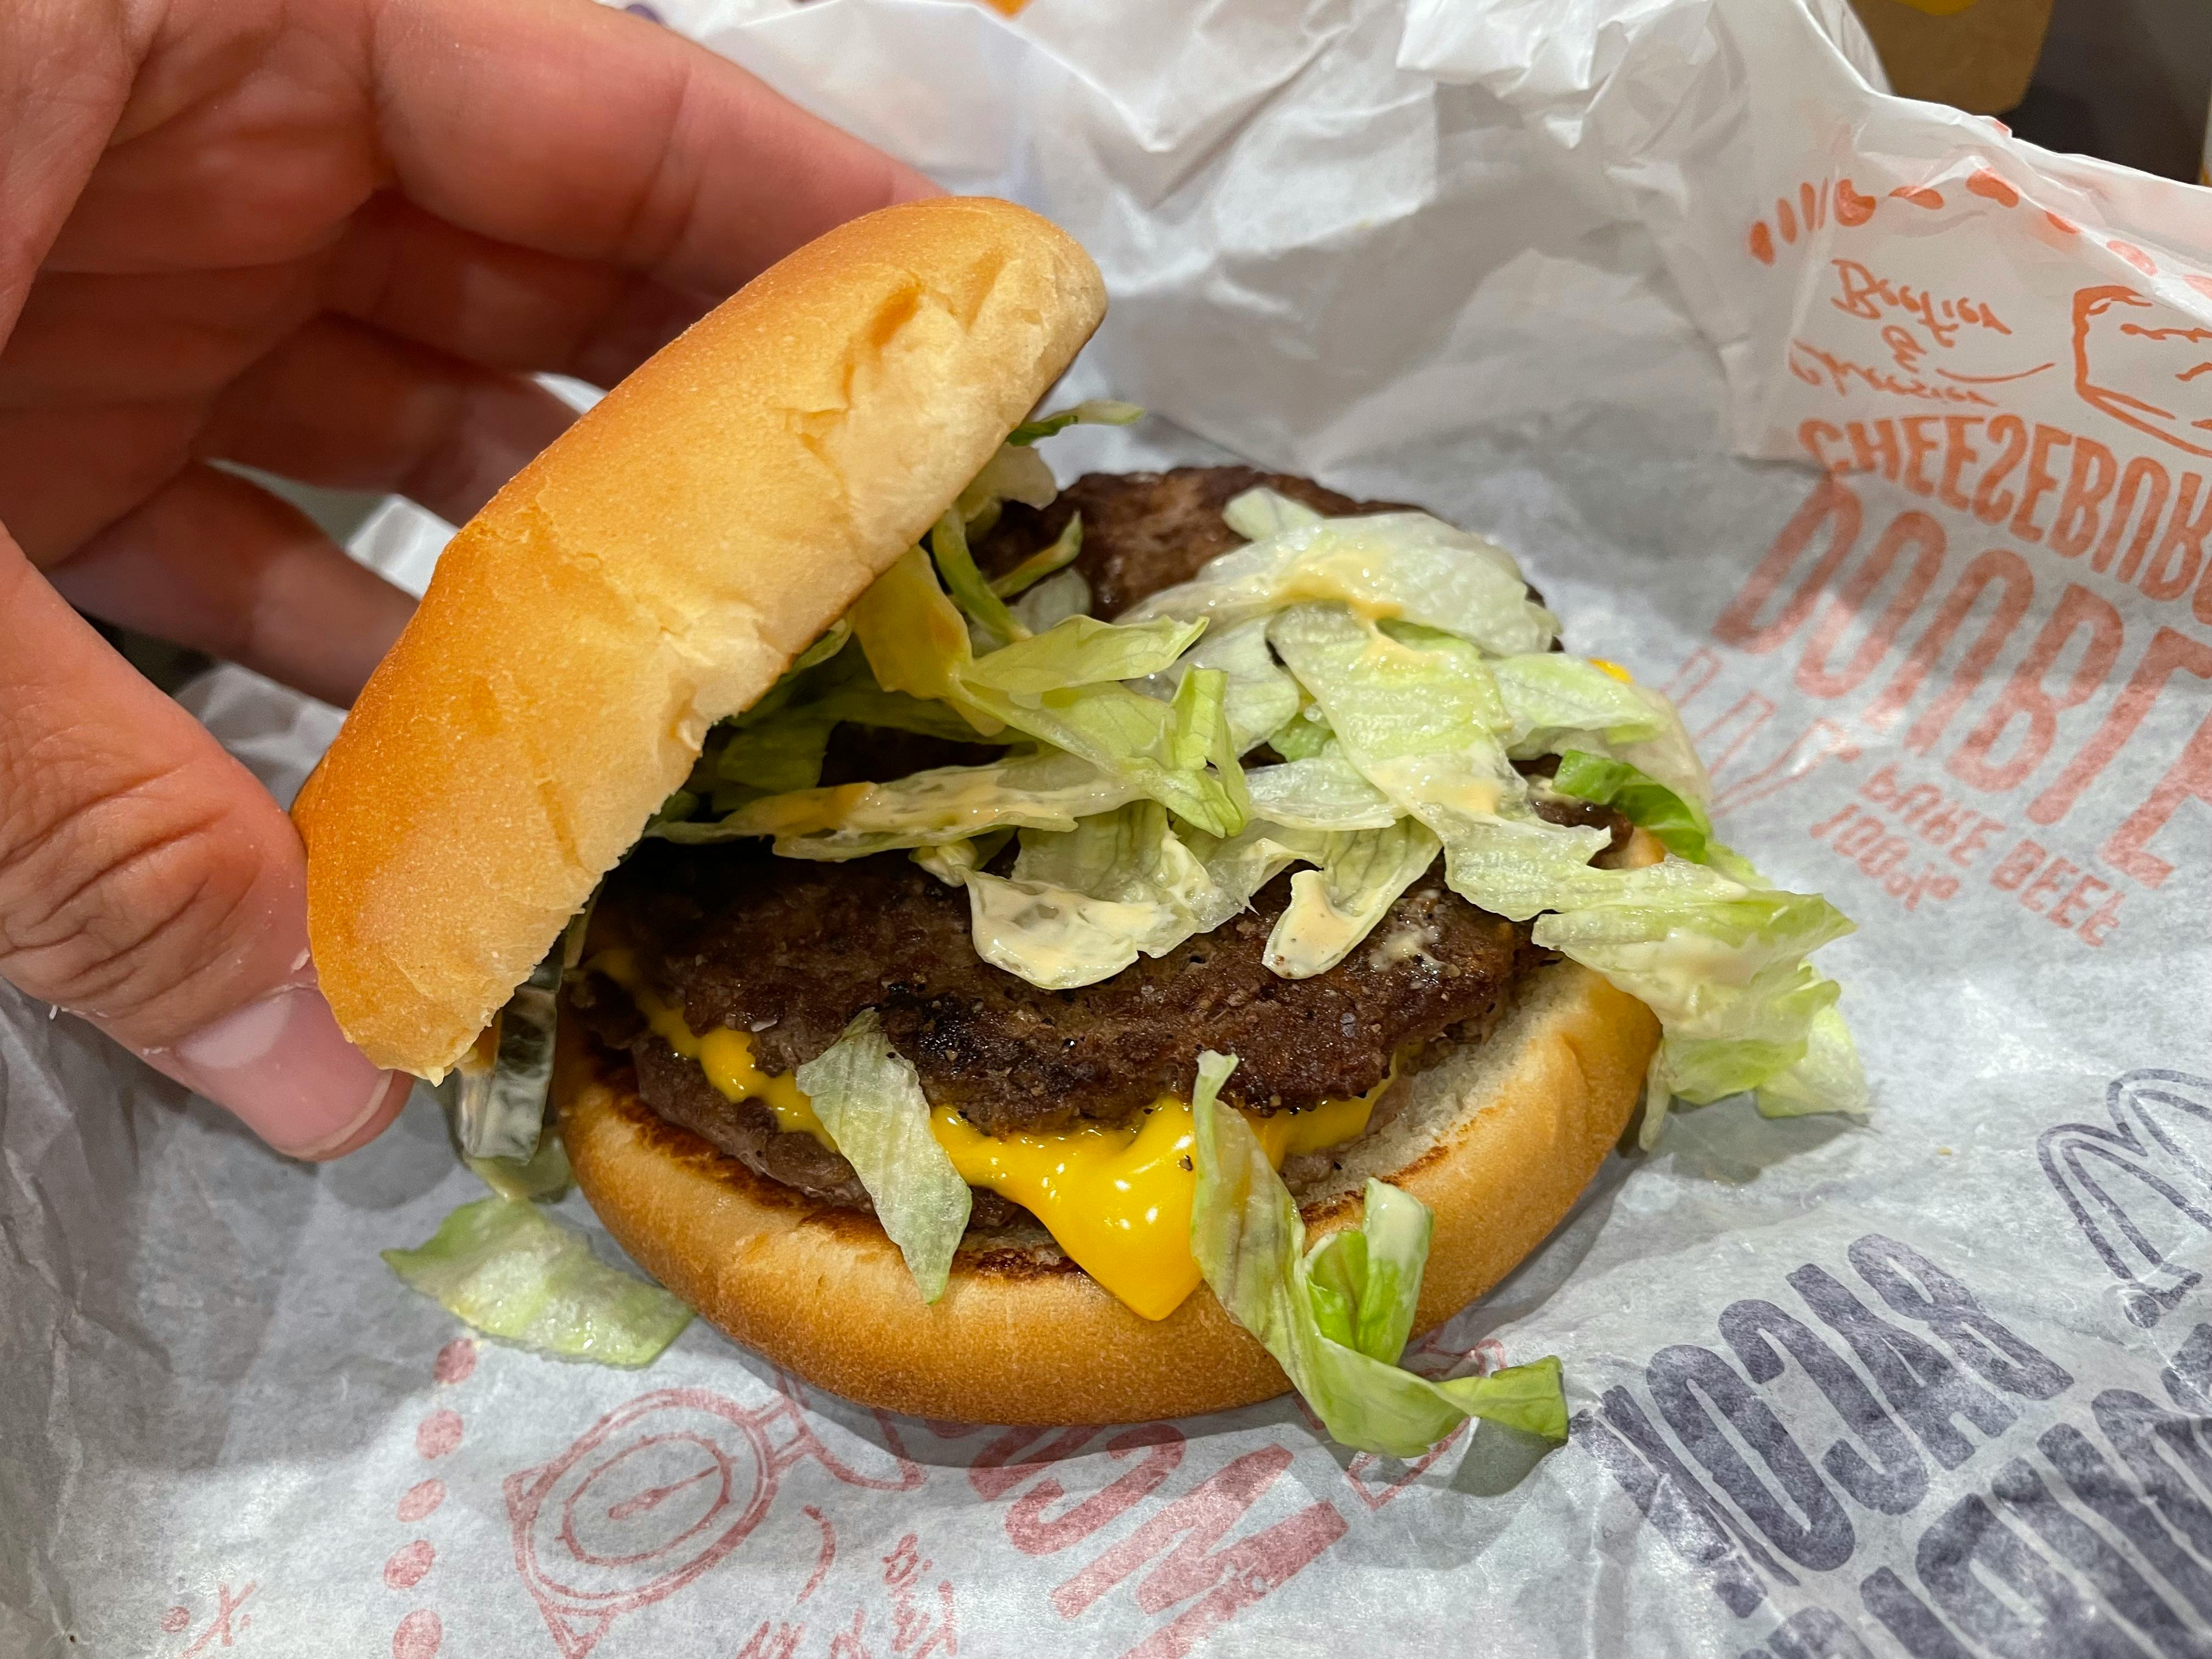 A person's hand lifting the top bun off of a McDonald's burger sitting on its paper wrapping.